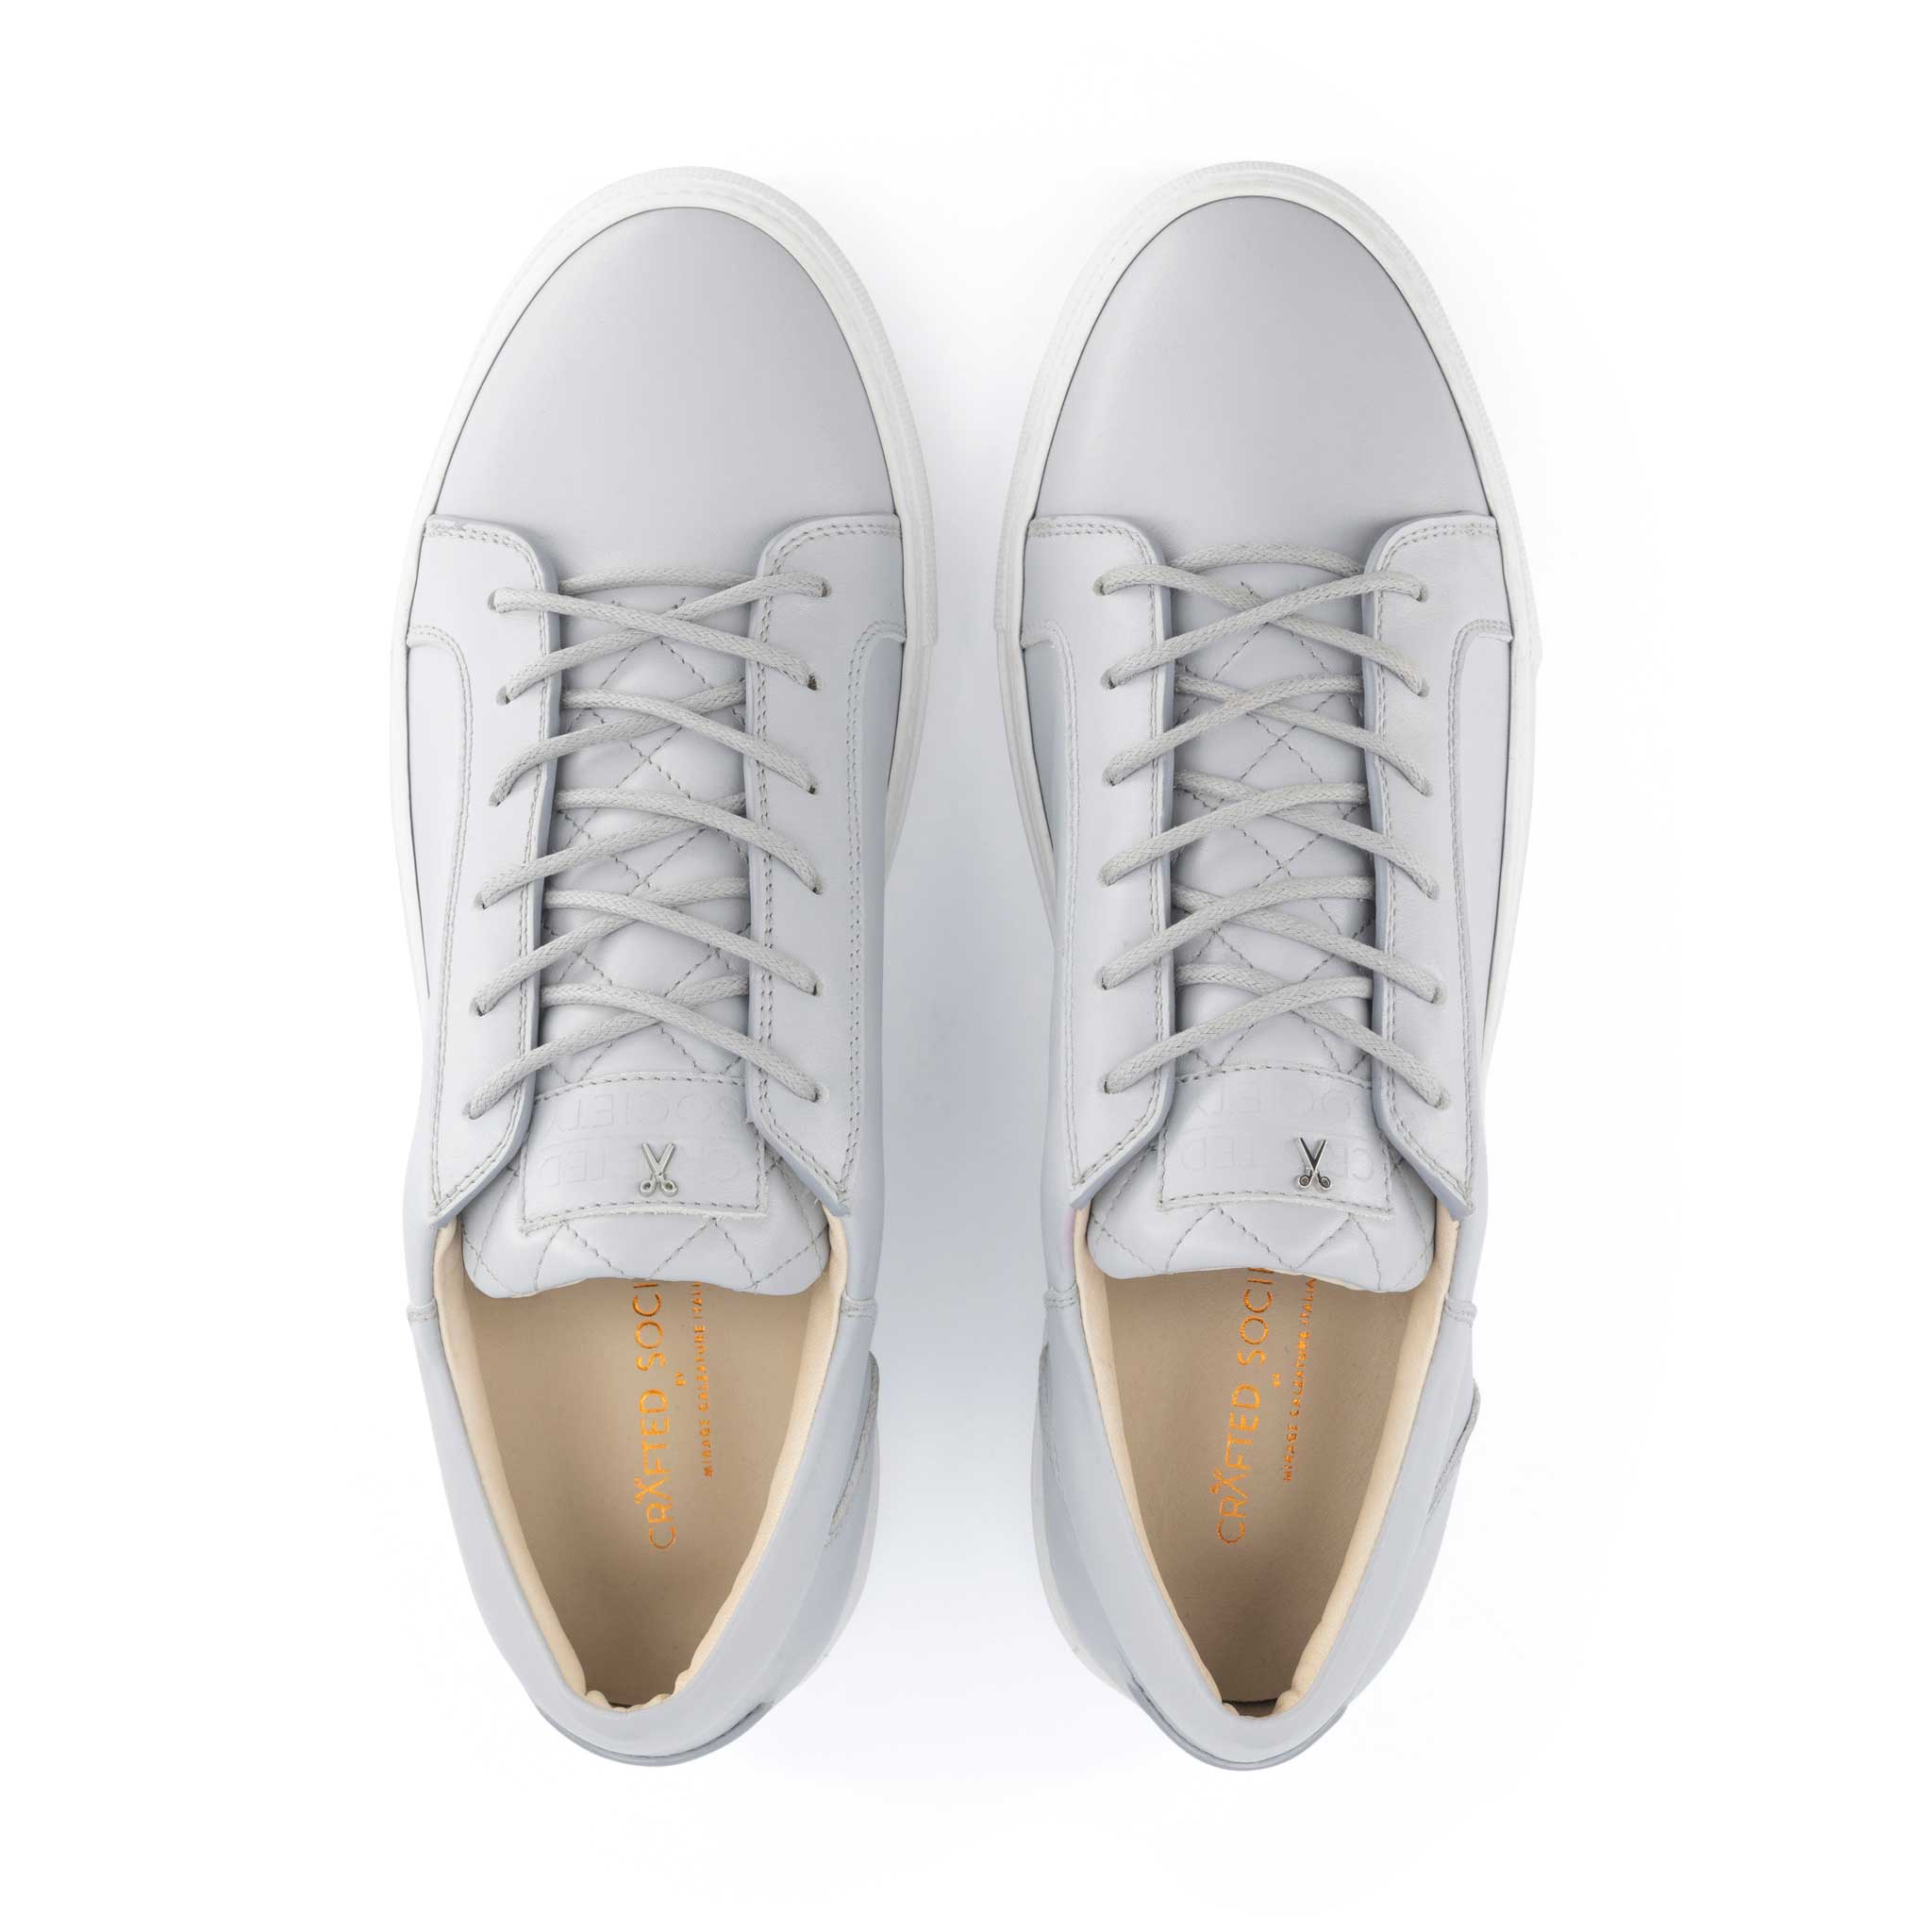 Italian leather sneaker in pearl grey top grain leather with white outsole